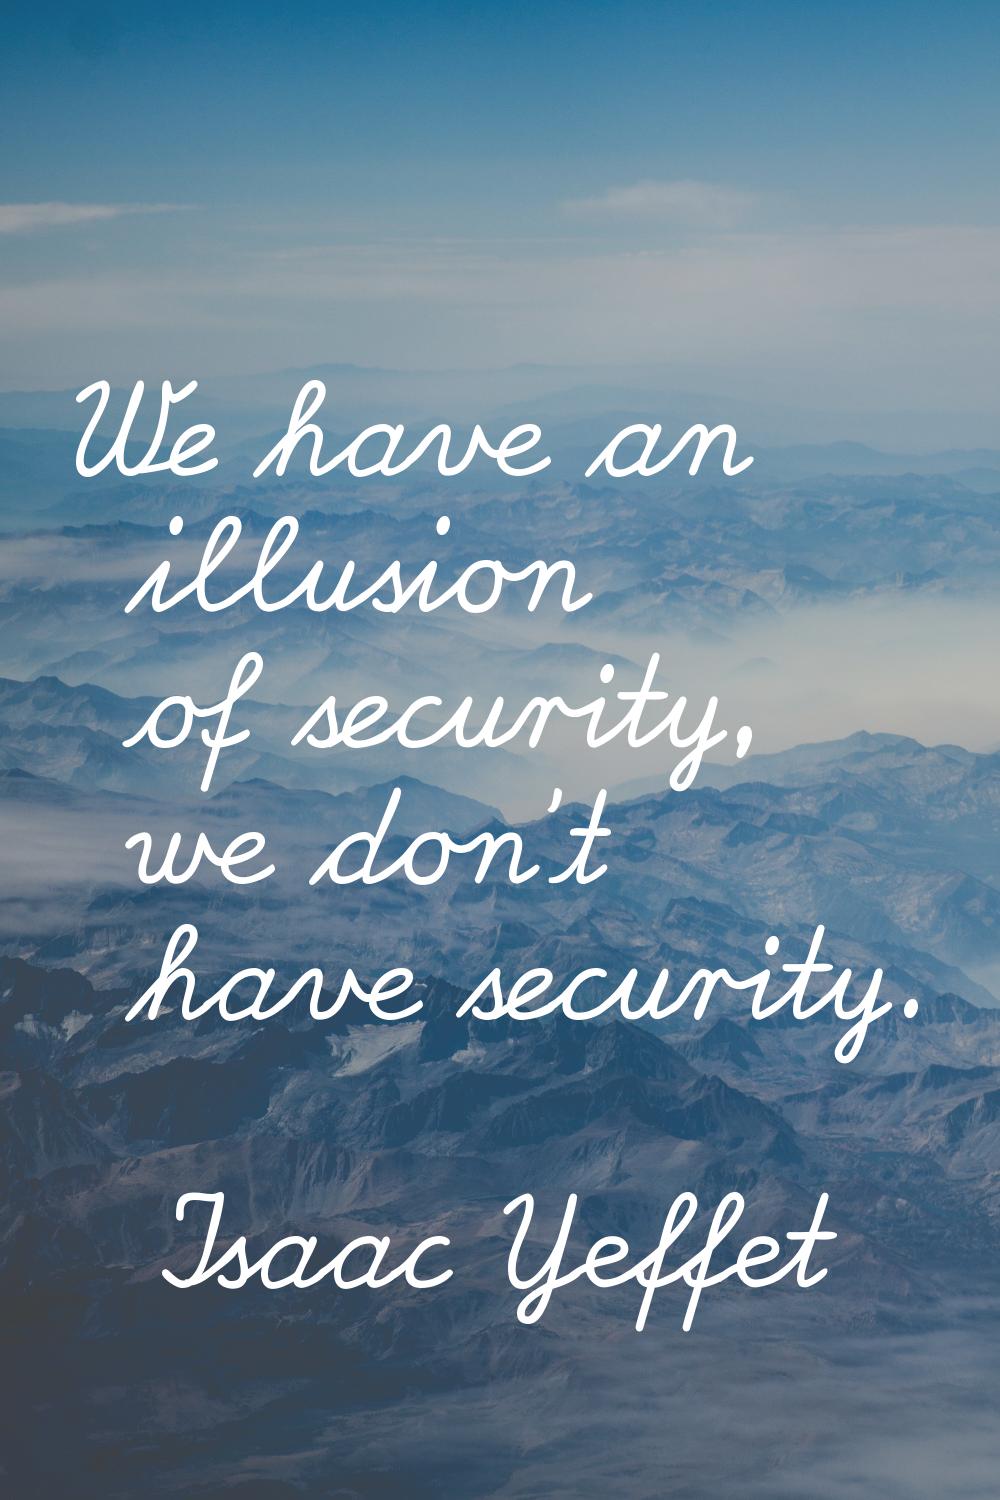 We have an illusion of security, we don't have security.